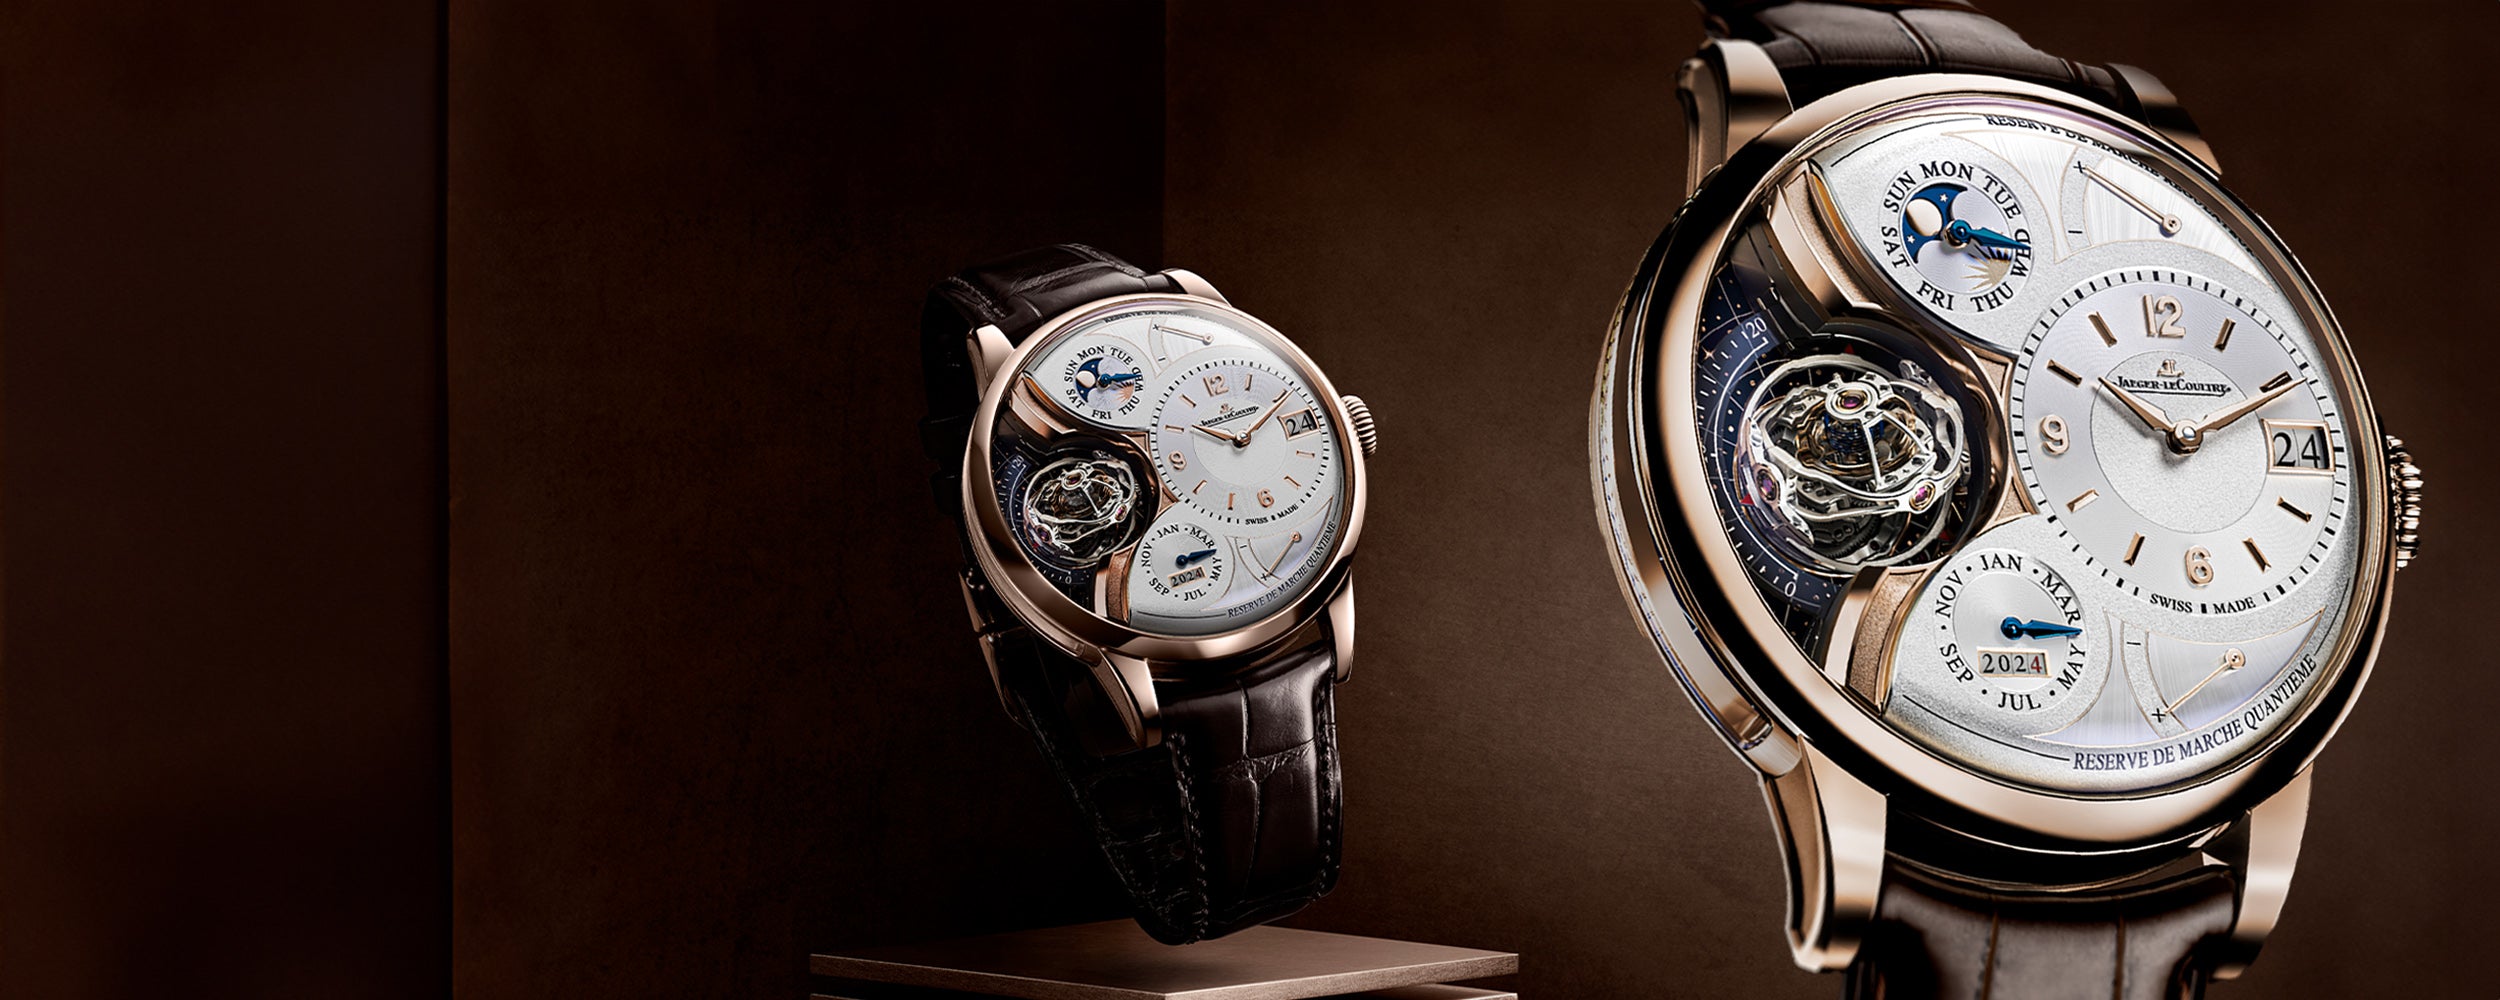 Watches and Wonders 2024 Jaeger-LeCoultre Presents the Duometre Heliotourbillon Perpetual